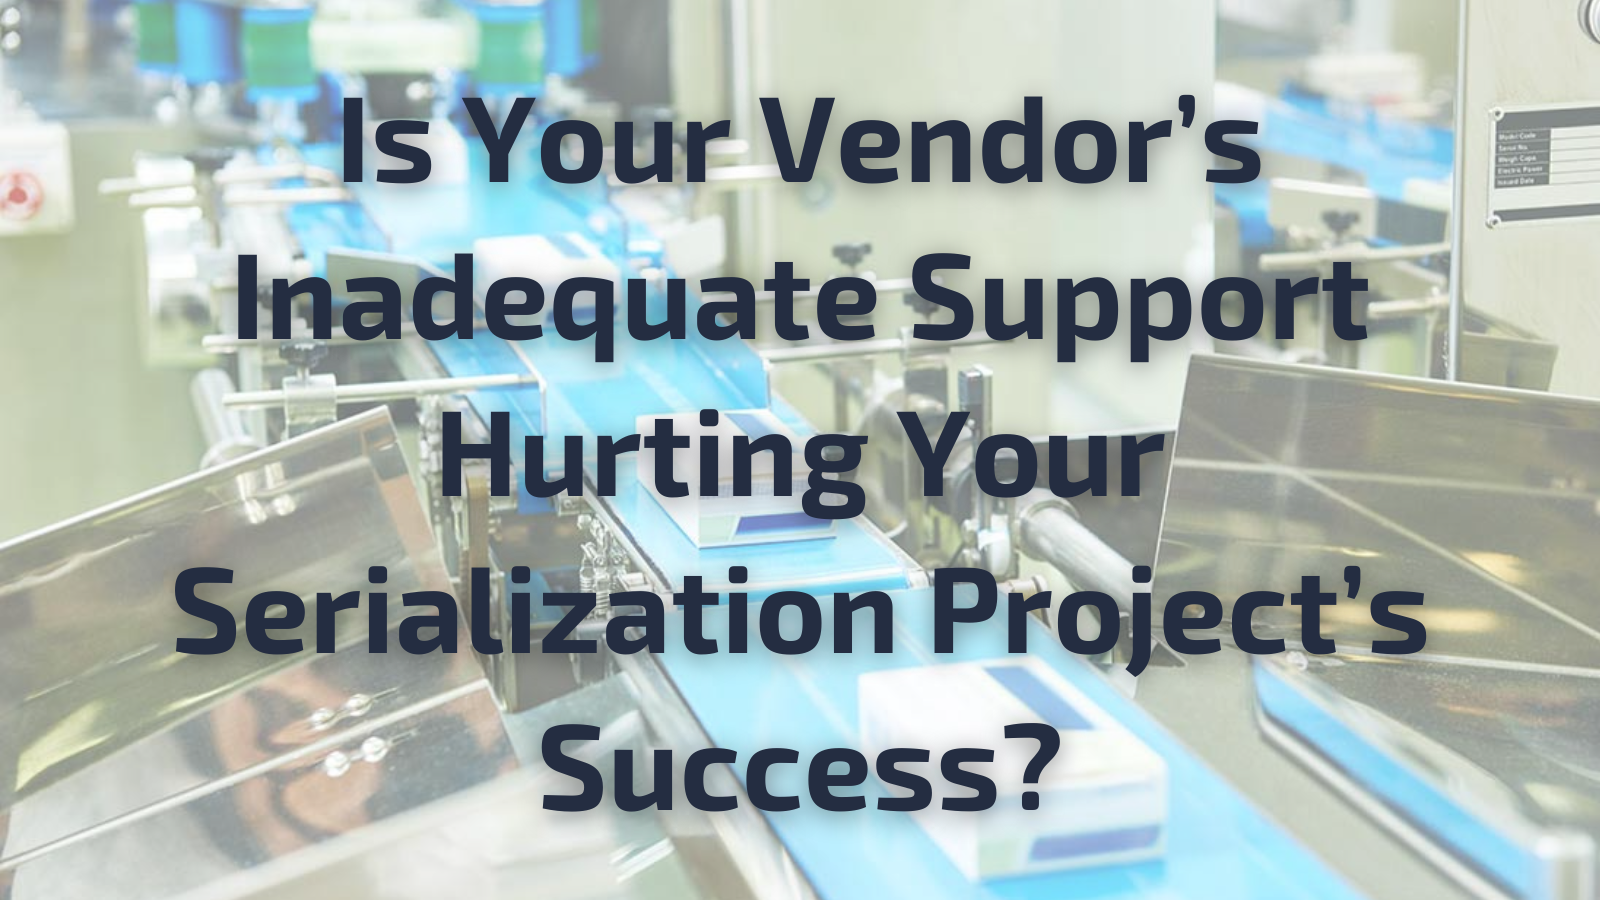 Is Your Vendor’s Inadequate Support Hurting Your Serialization Project’s Success?